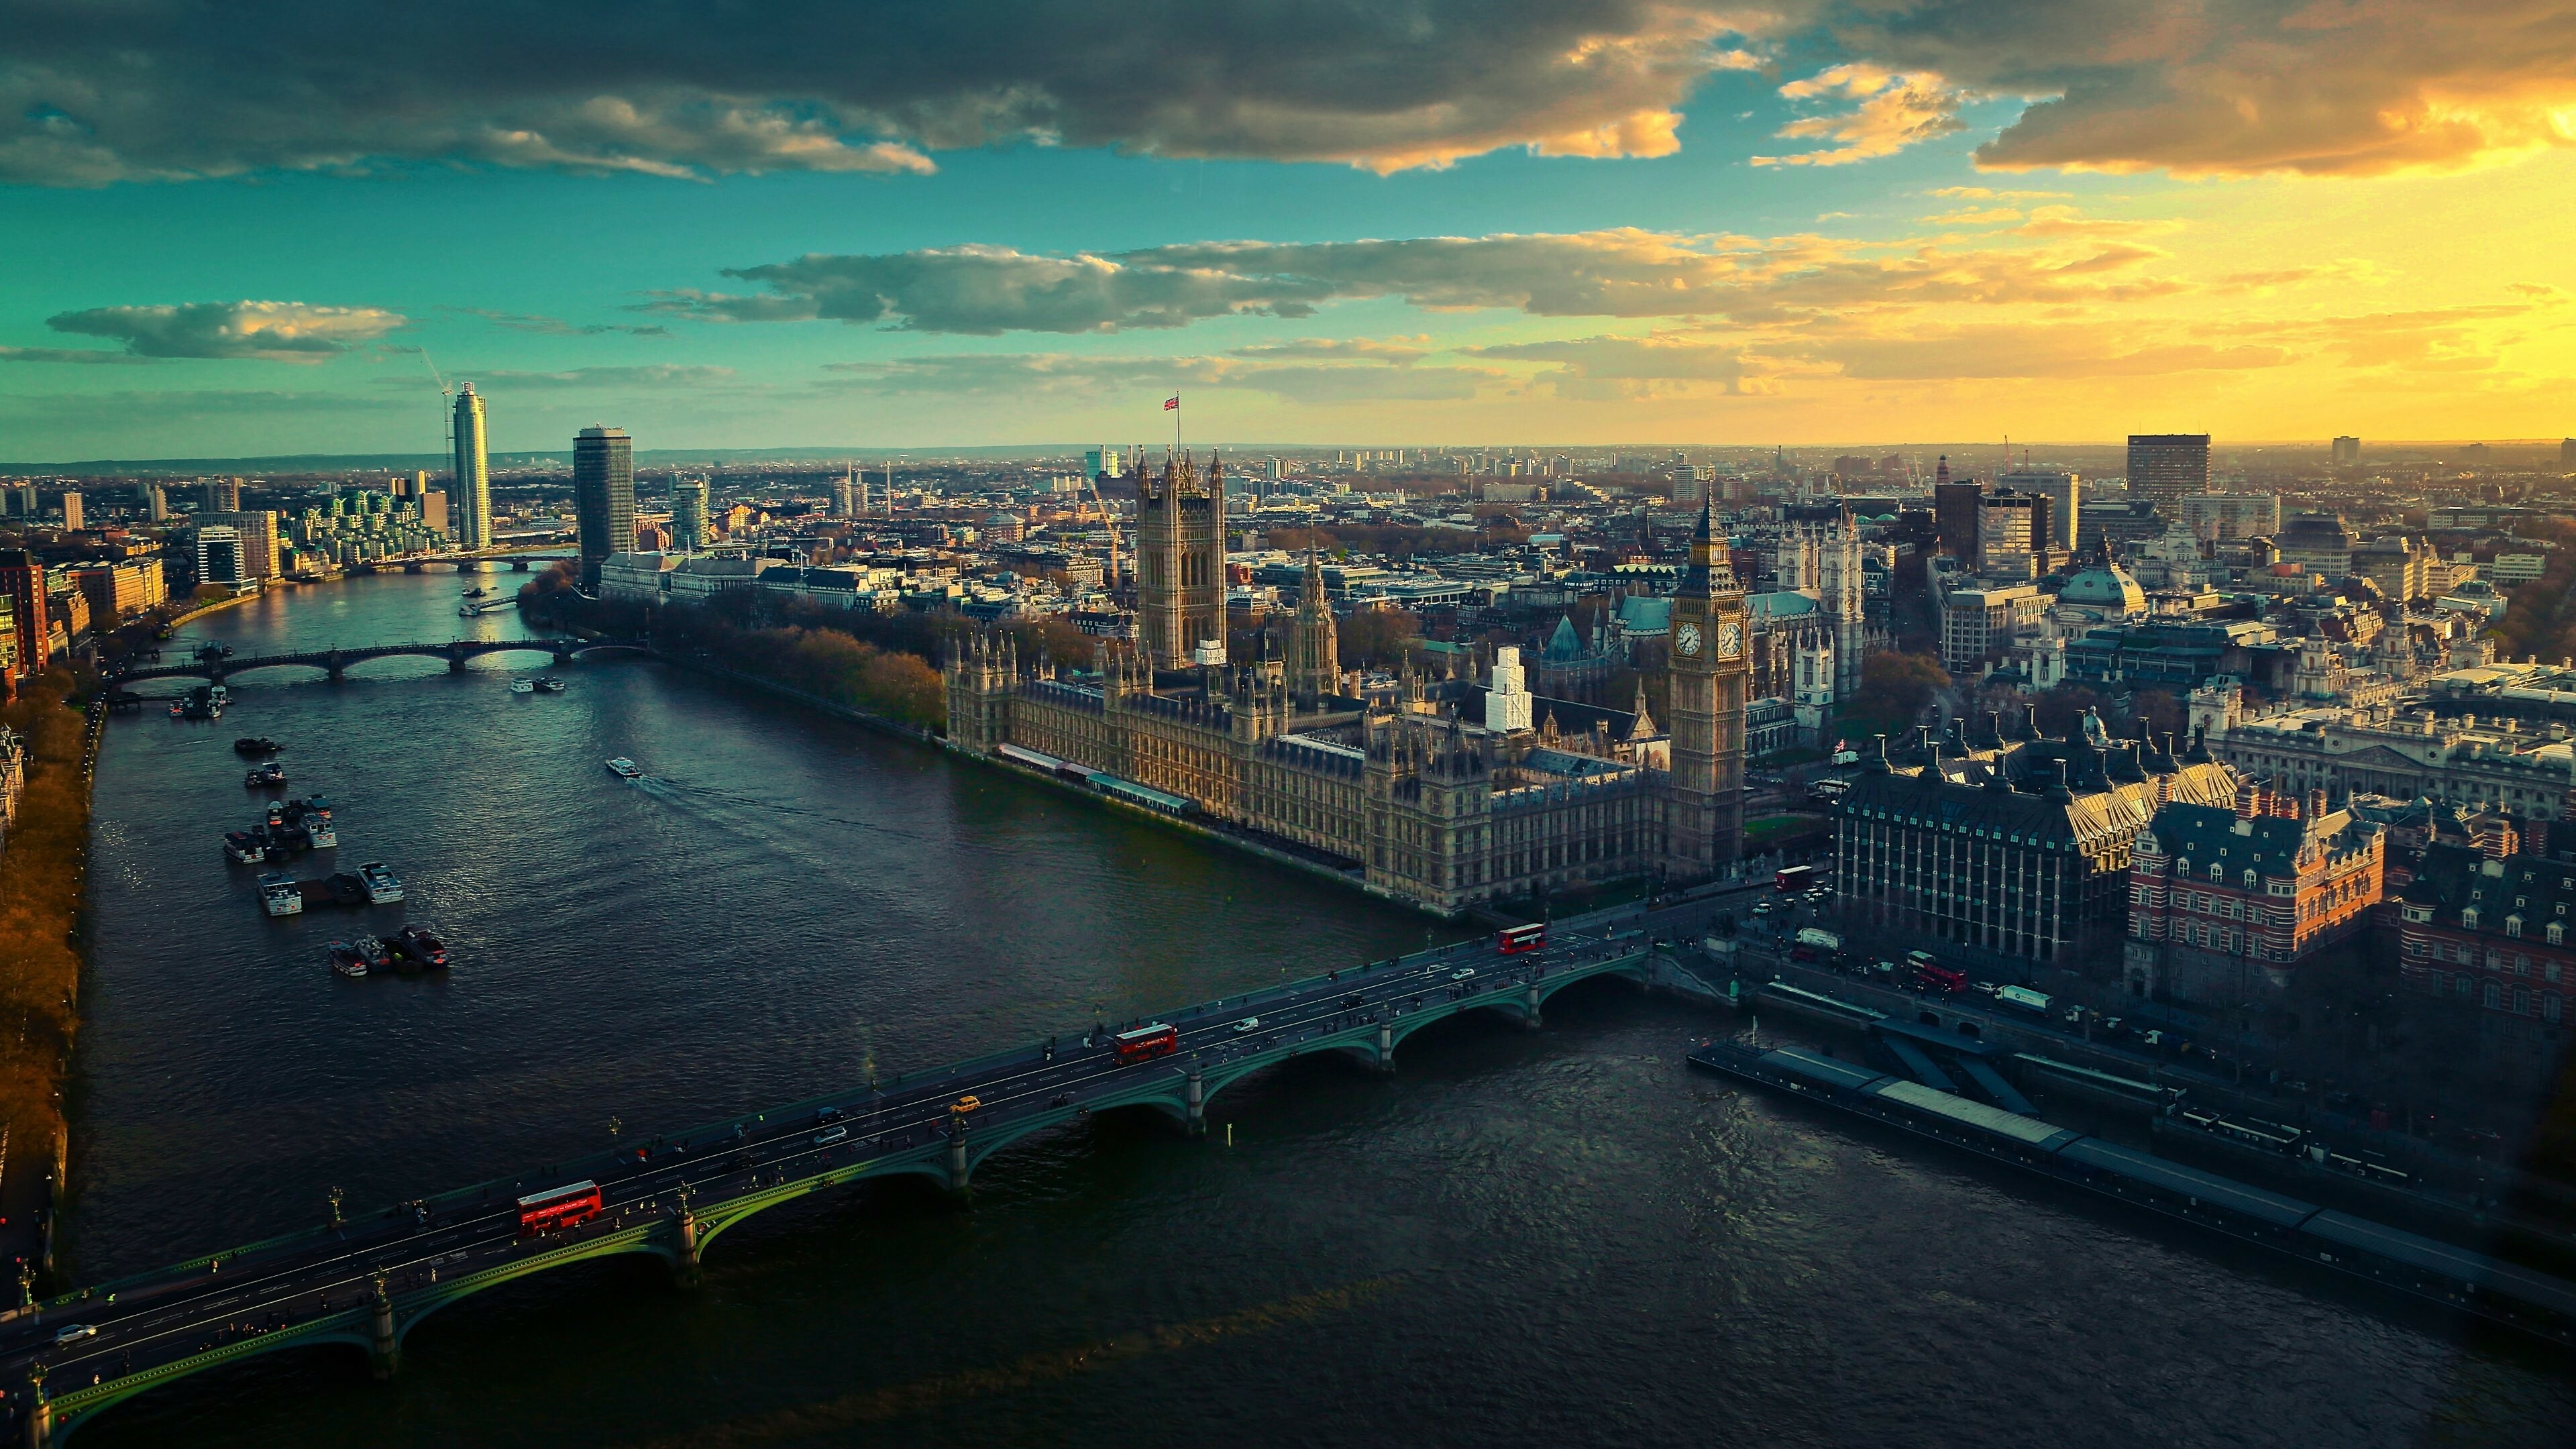 United Kingdom: Westminster, England, Great Britain, River Thames, Cityscape. 3840x2160 4K Wallpaper.